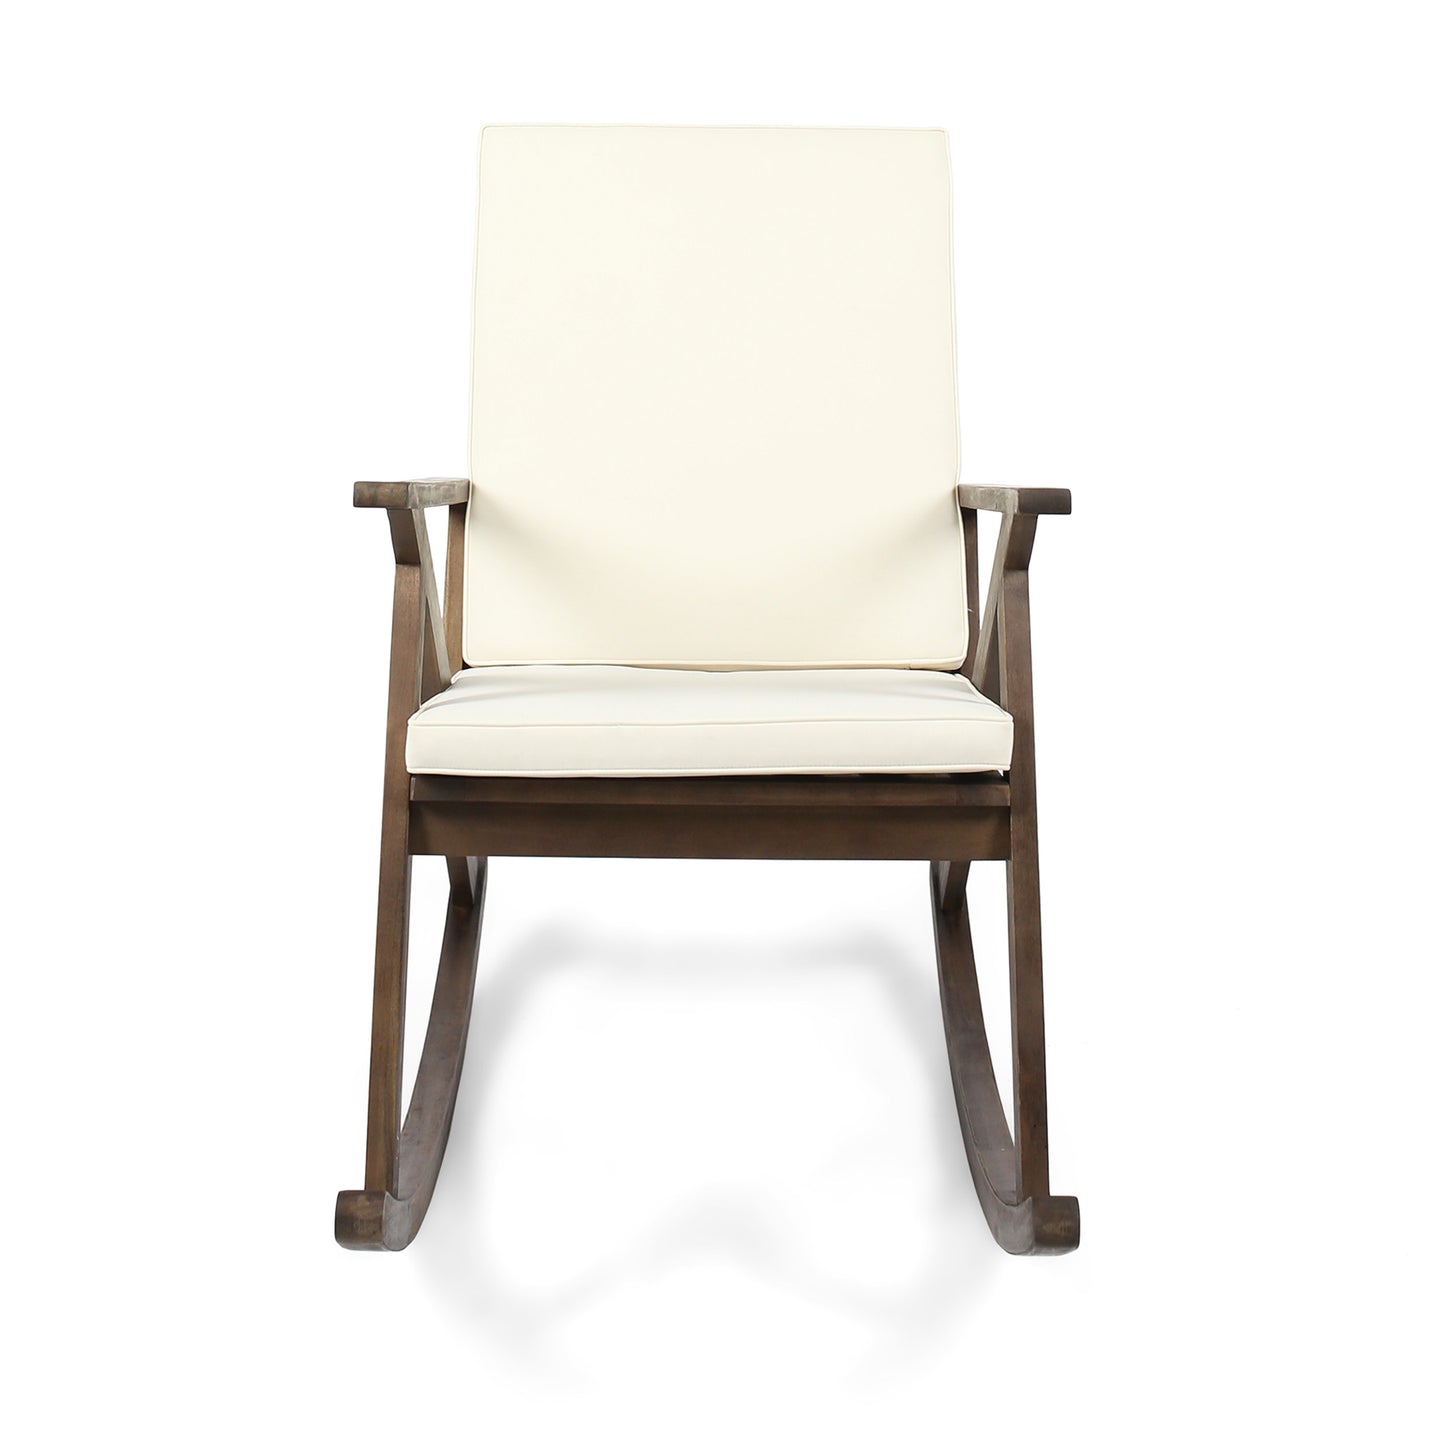 Louise Outdoor Acacia Wood Rocking Chair with Cushion